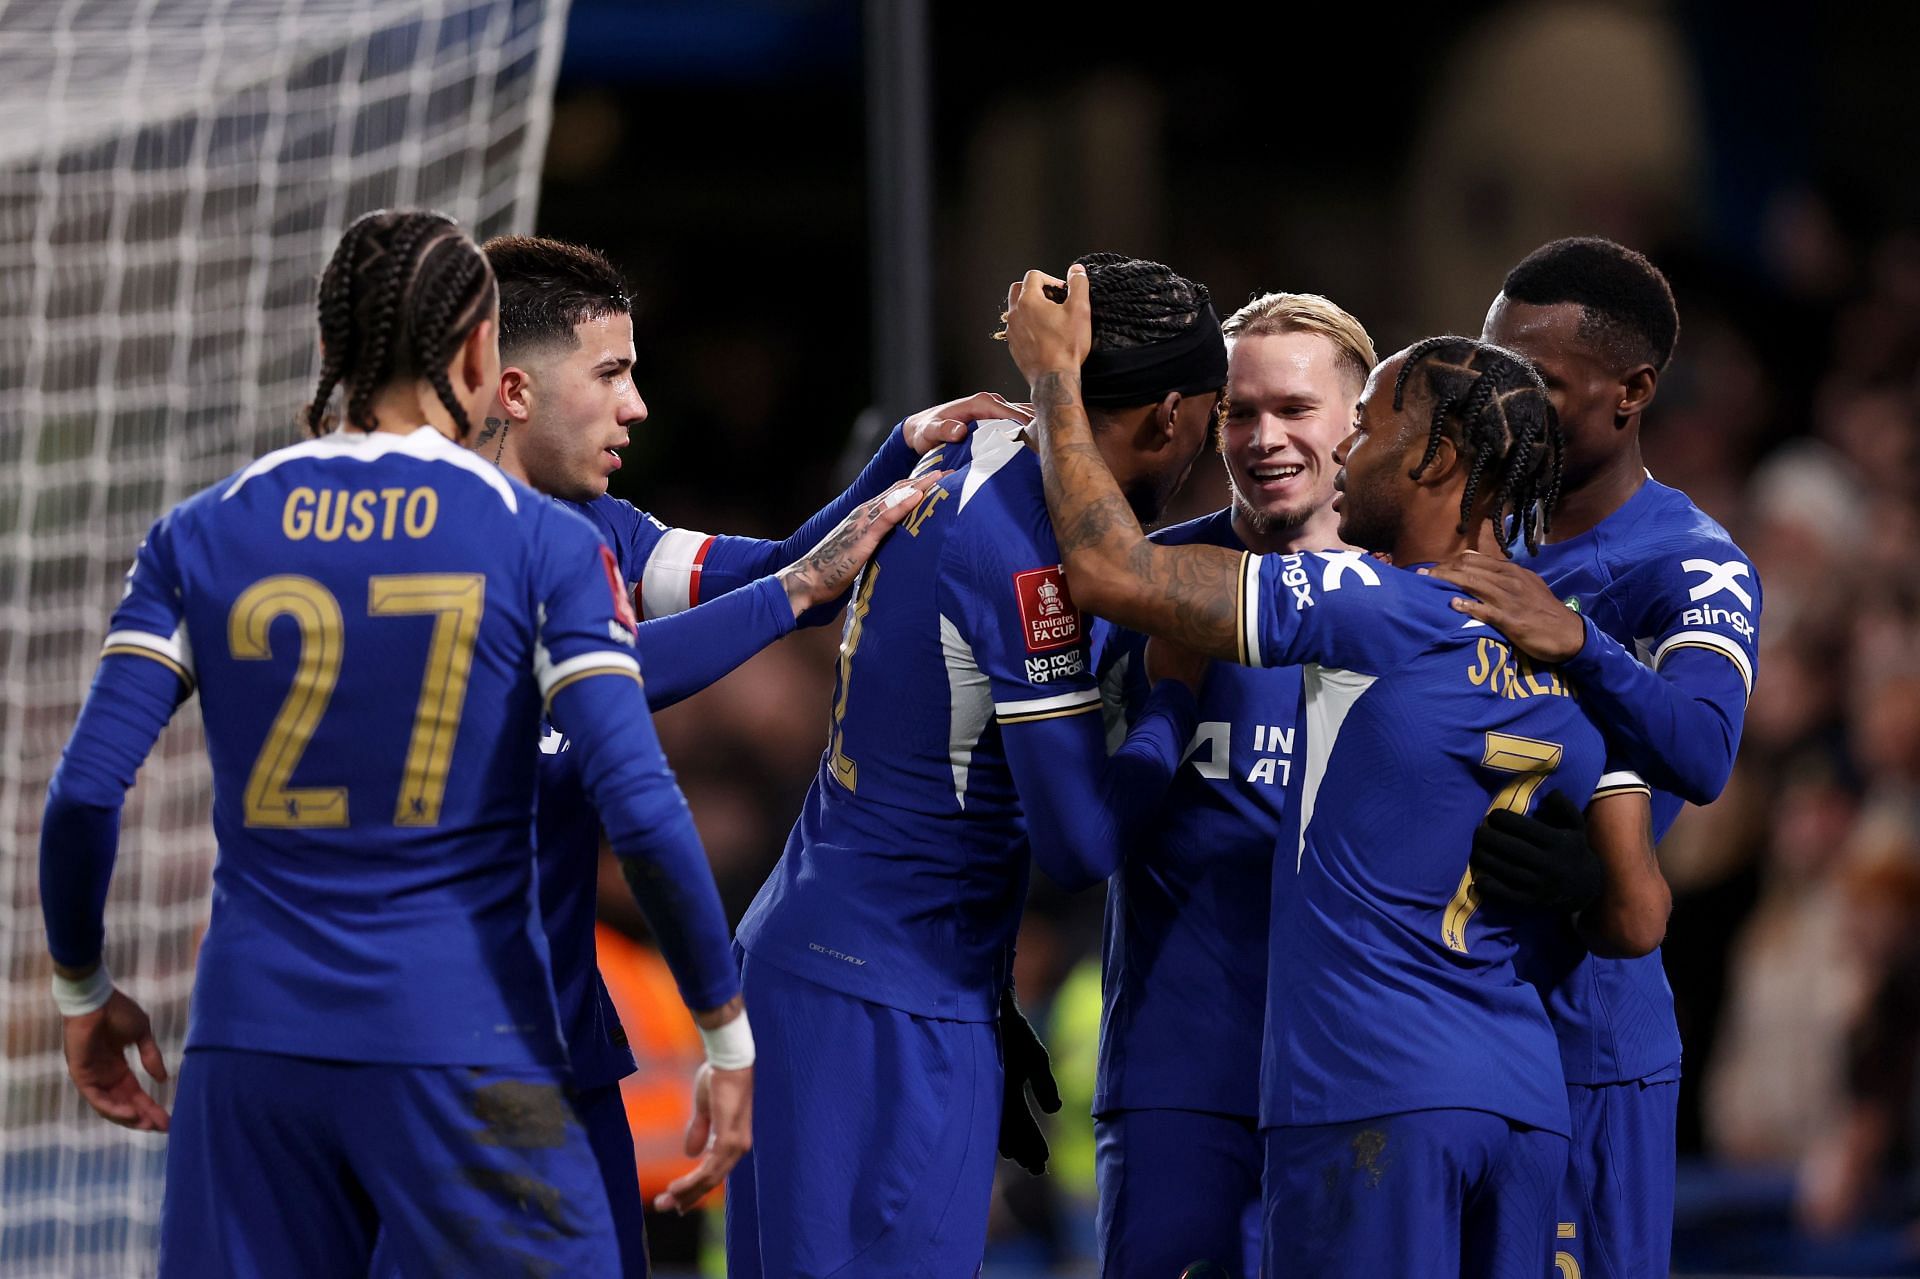 Chelsea needed a late winner to defeat Leeds United in the FA Cup